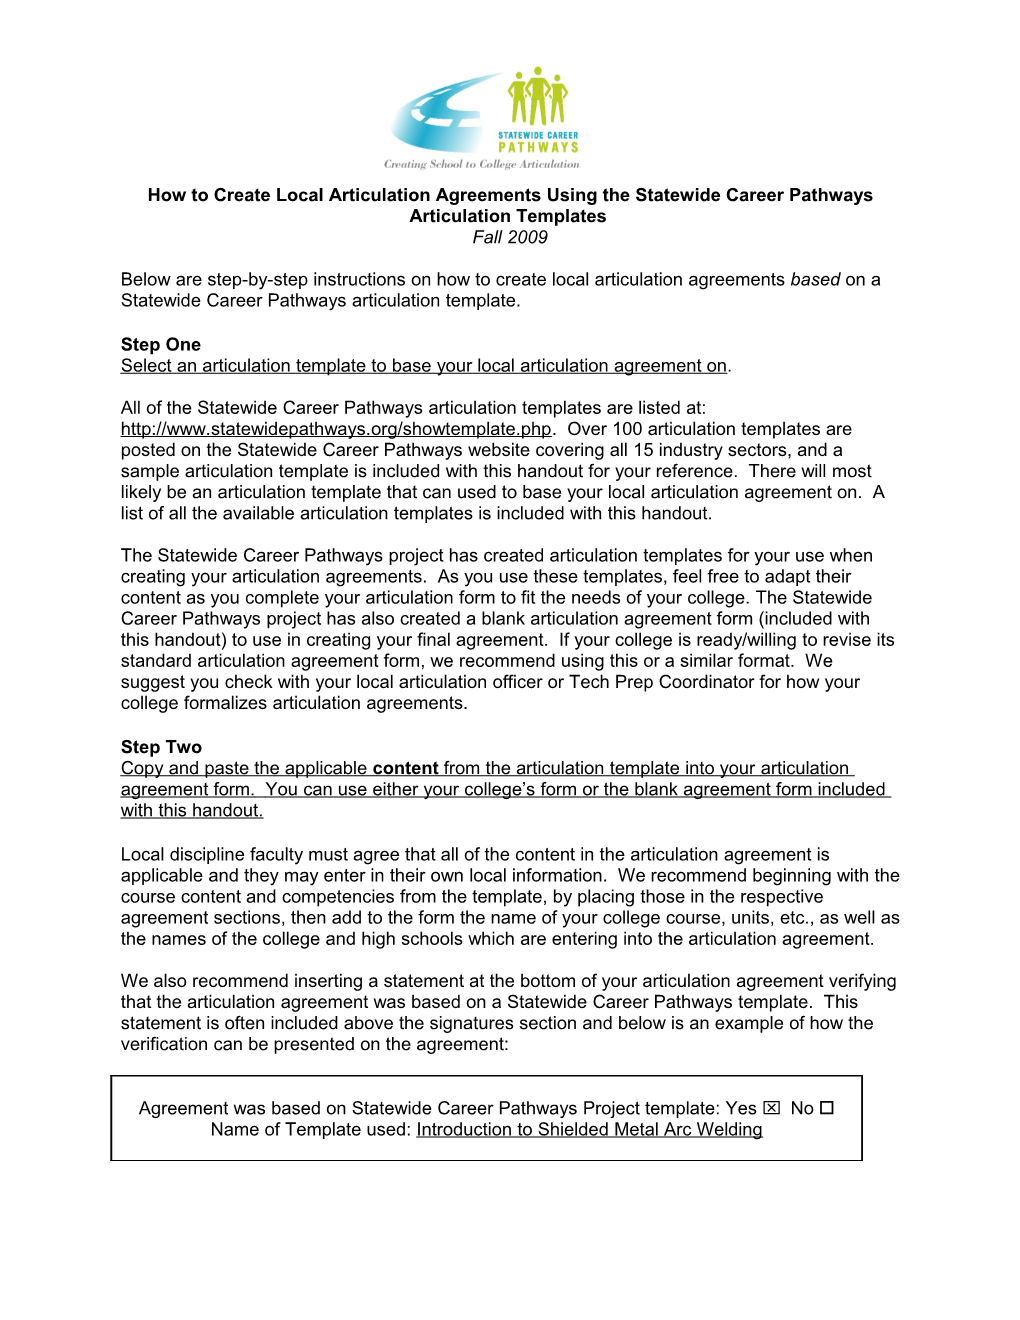 What Is a Statewide Career Pathways Articulation Template, and How Do I Use It